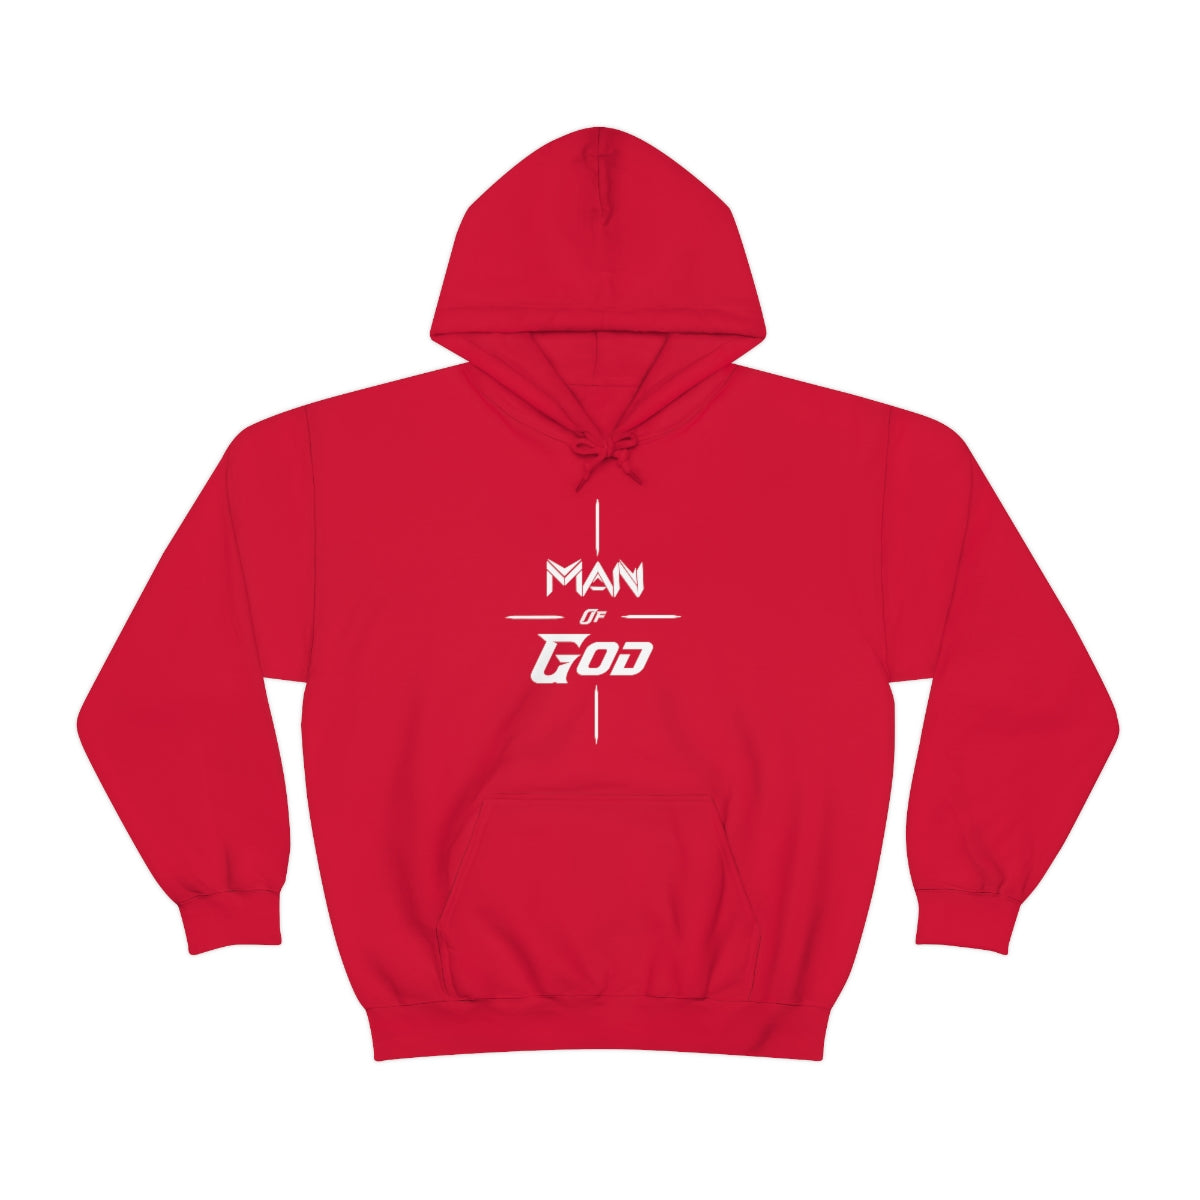 Man of God- Hooded Sweatshirt( Available in more colors)